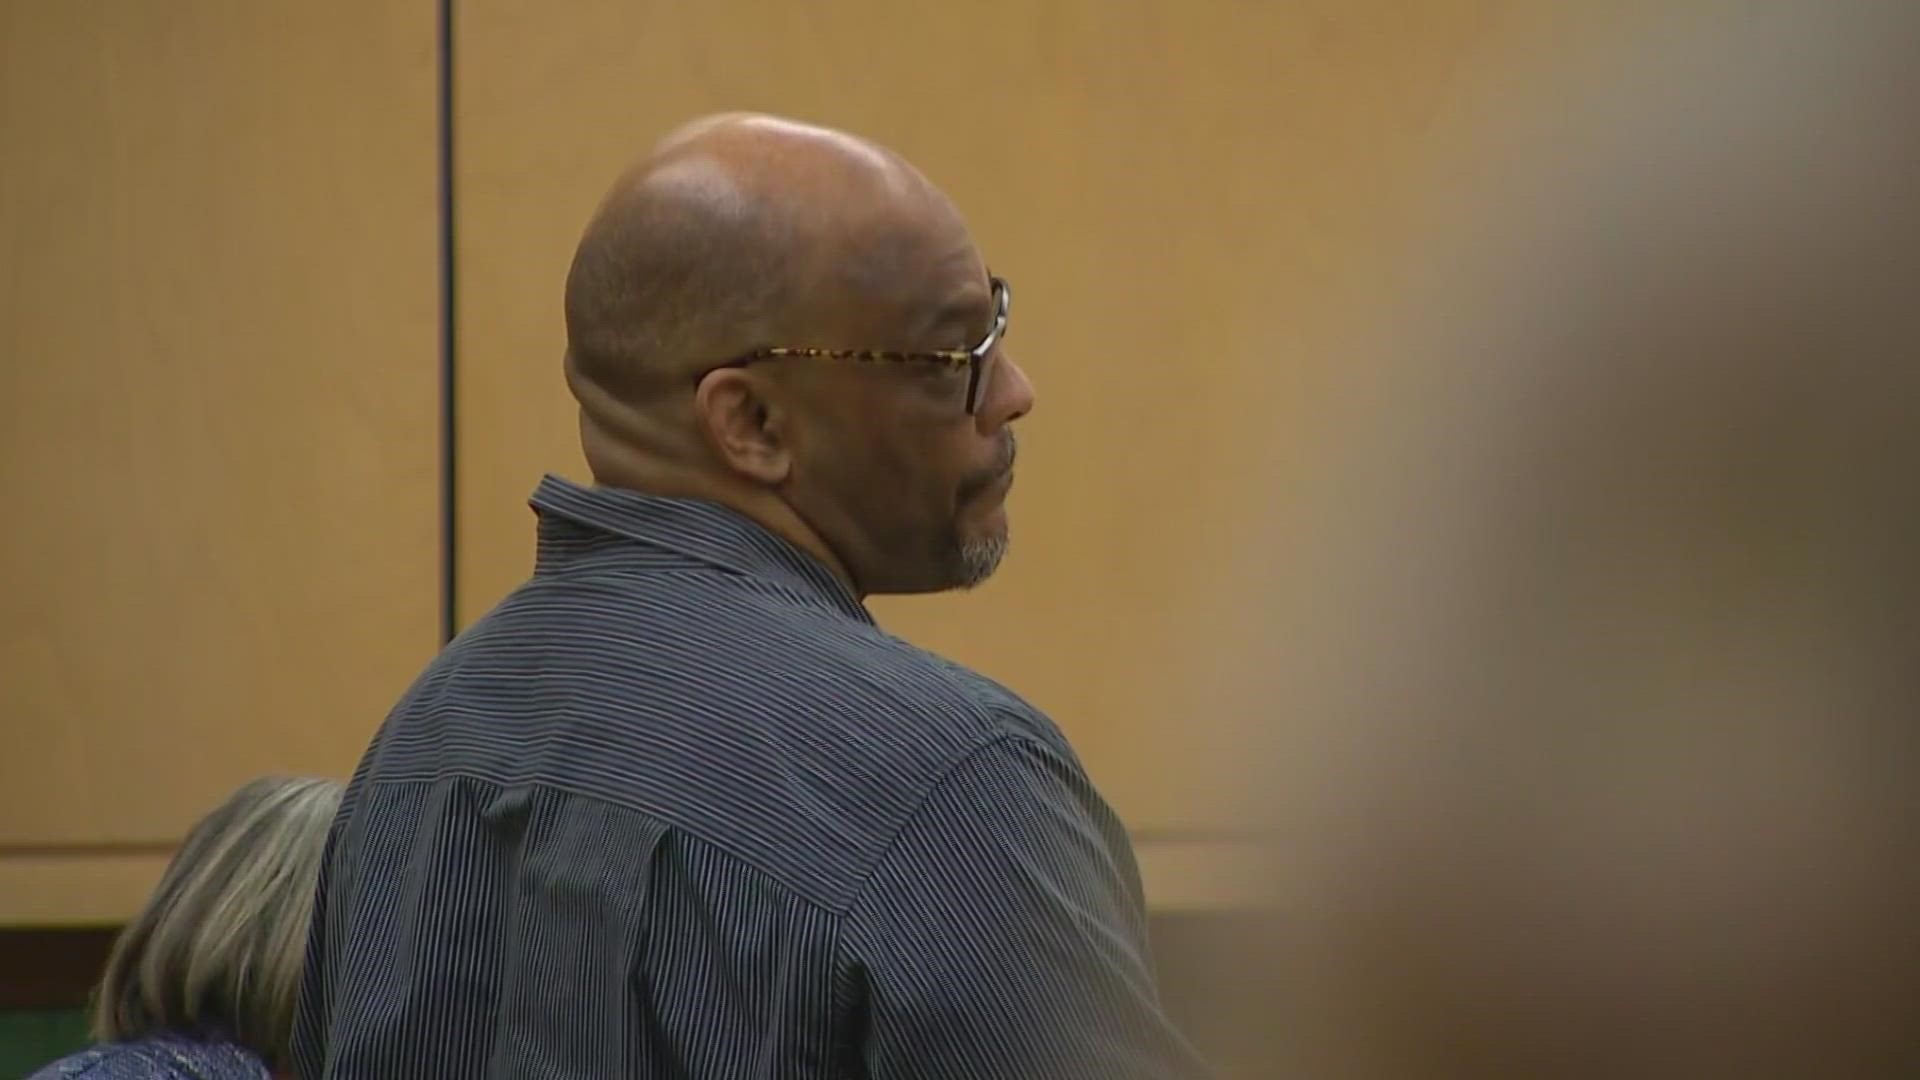 The judge declared a mistrial and dismissed the jury. He set a new trial date for April 20.